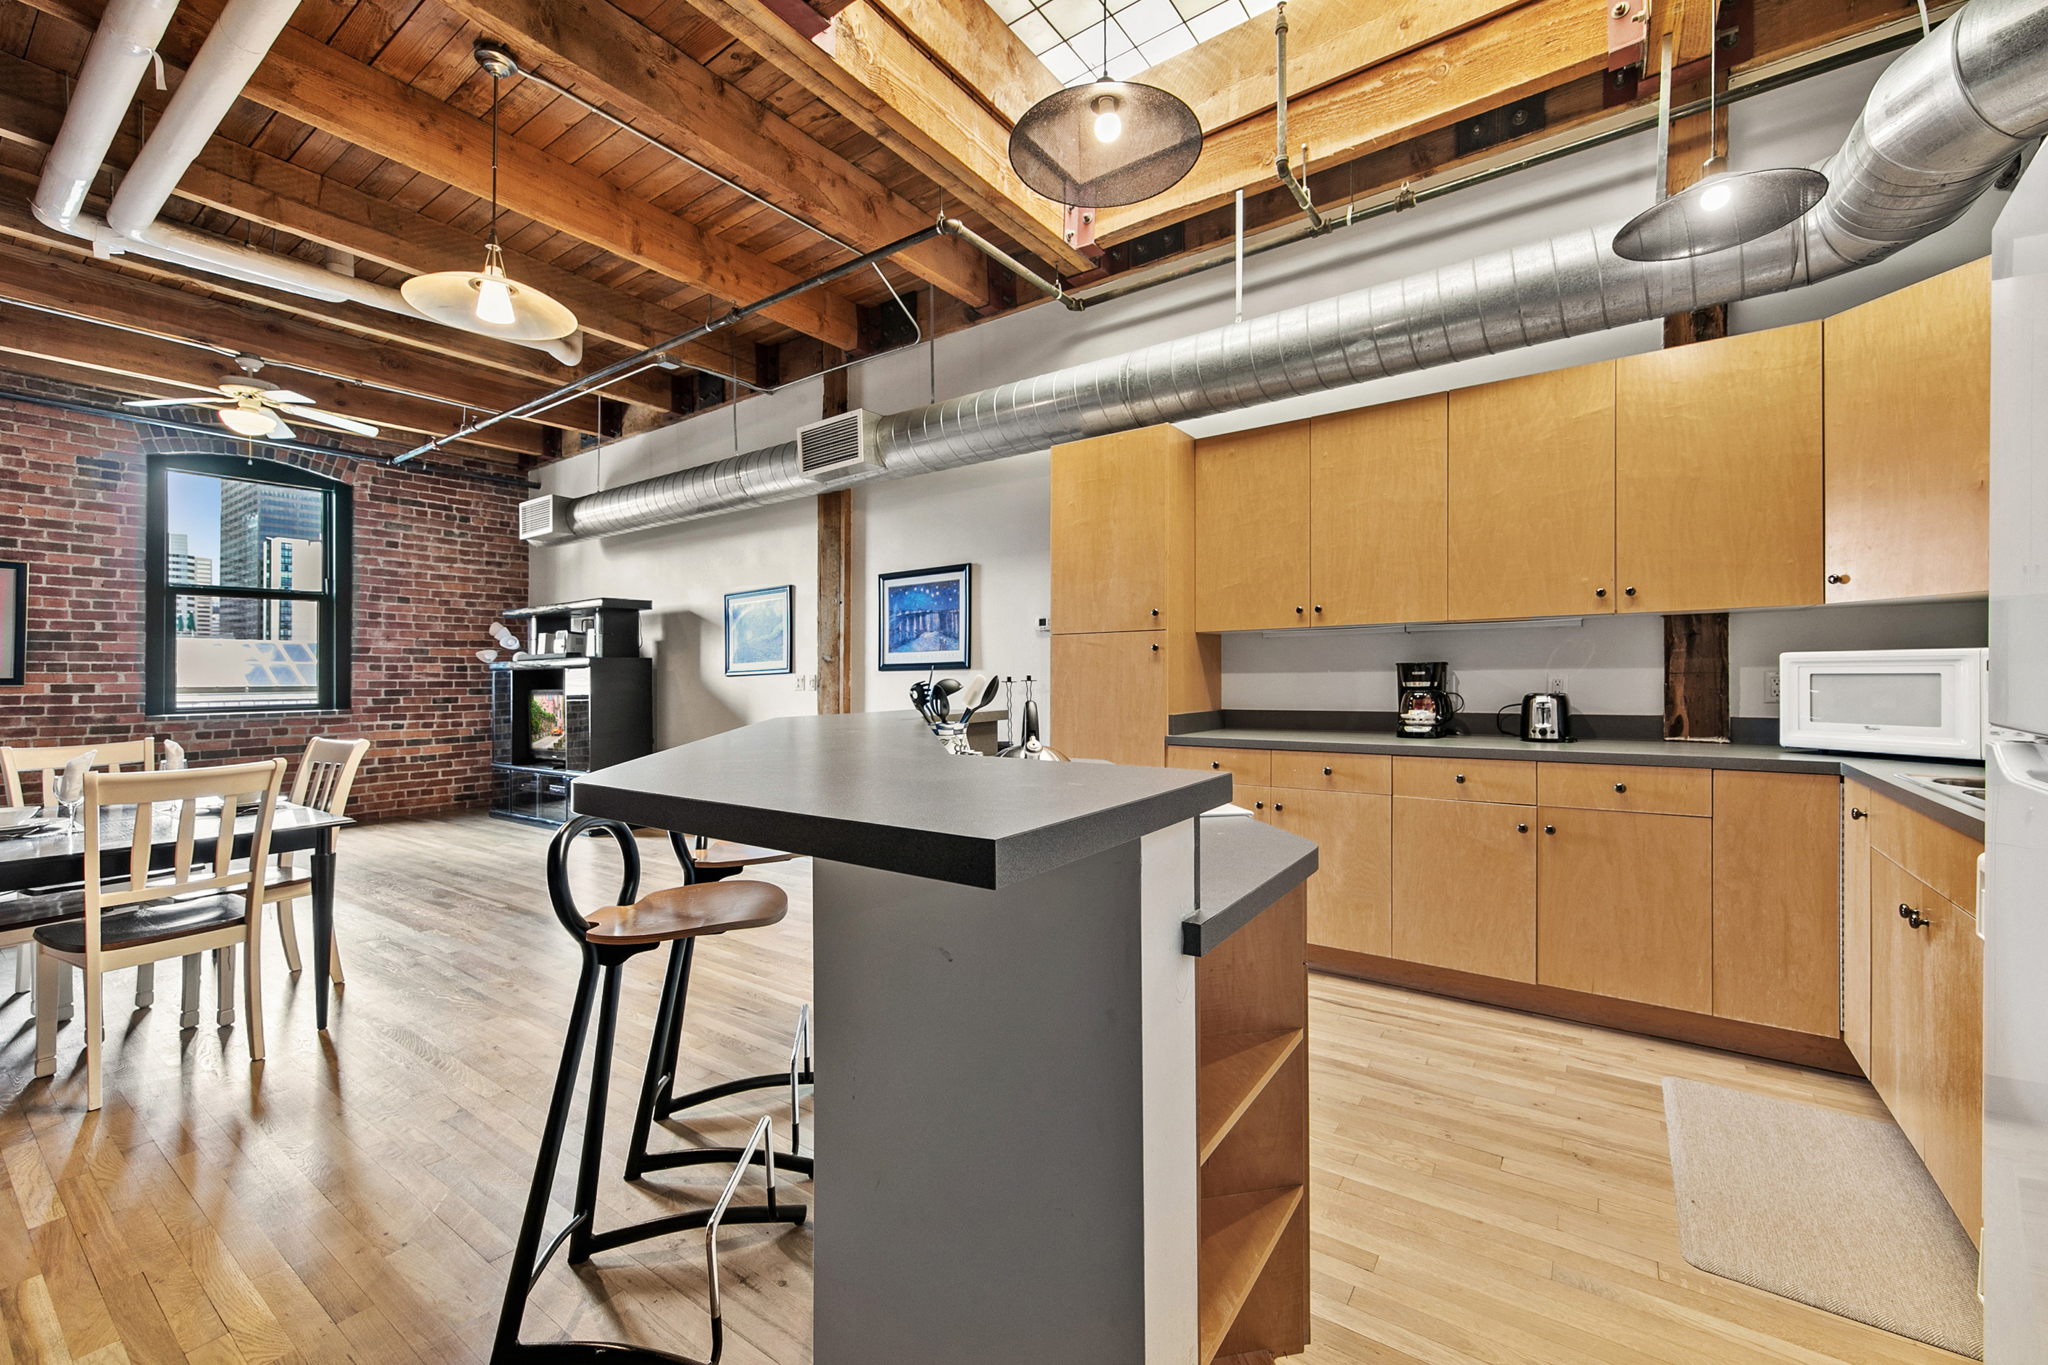 1 Bedroom/1Bathroom loft in Denver\'s new LoDo (Lower Downtown) district!  Features: original exposed brick walls, original arched windows, breakfast bar, granite slab, granite tile in kitchen, and walk-in closet.

Amenities include: community rooftop deck, club/party room, fitness center.

The building sits within easy walking distance to shops, restaurants, bars, the light rail station, and Coors Field. For residents looking for culture, the building is also closely situated to museums and theaters.